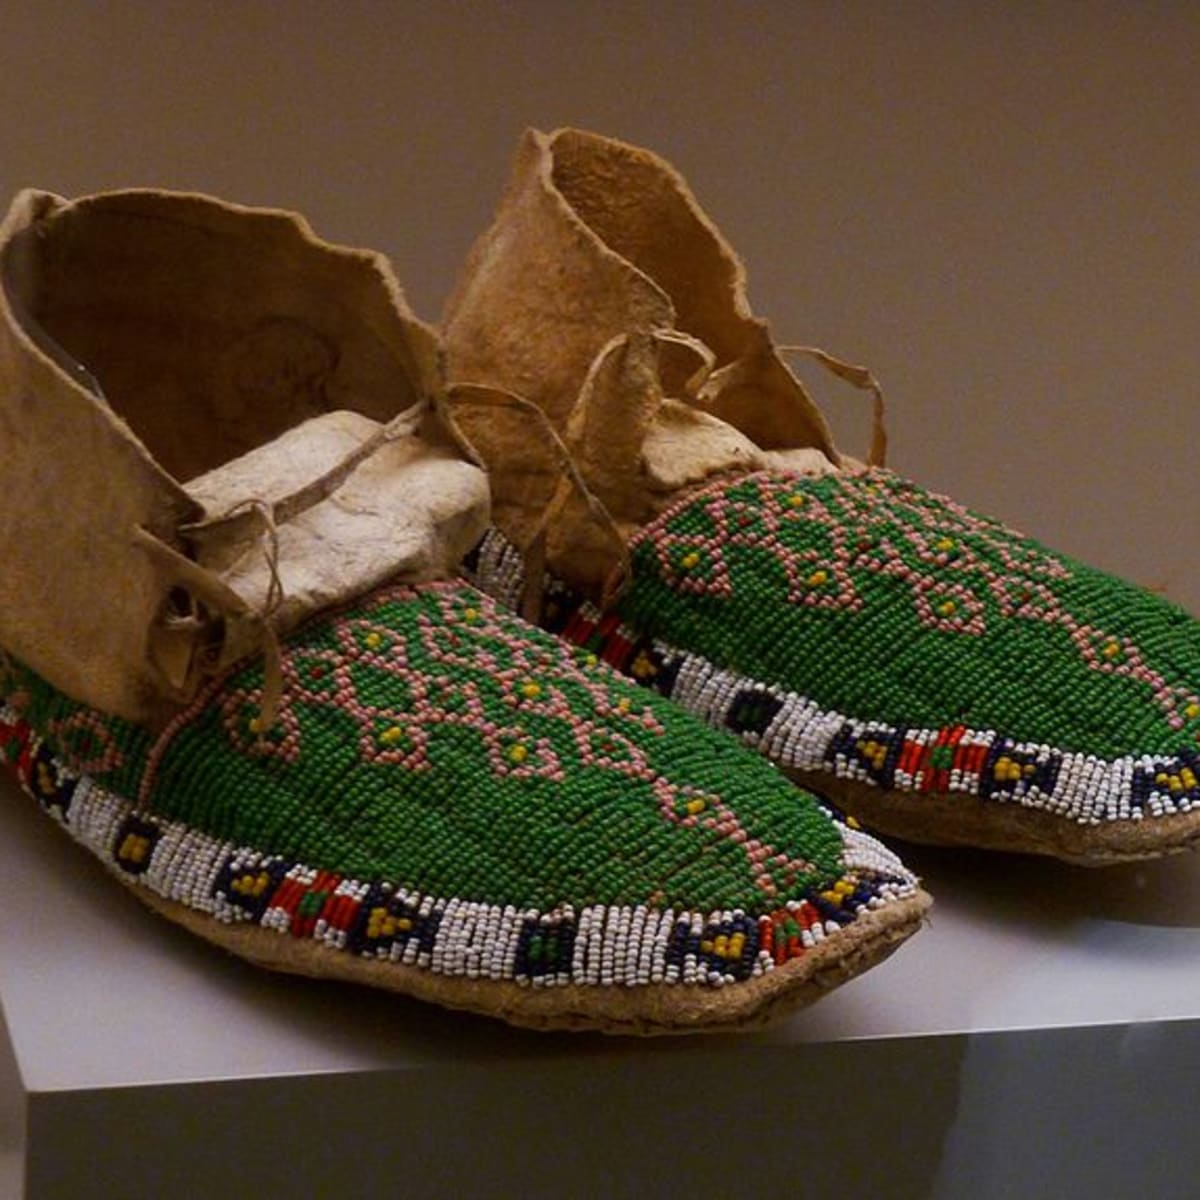 making your own moccasins